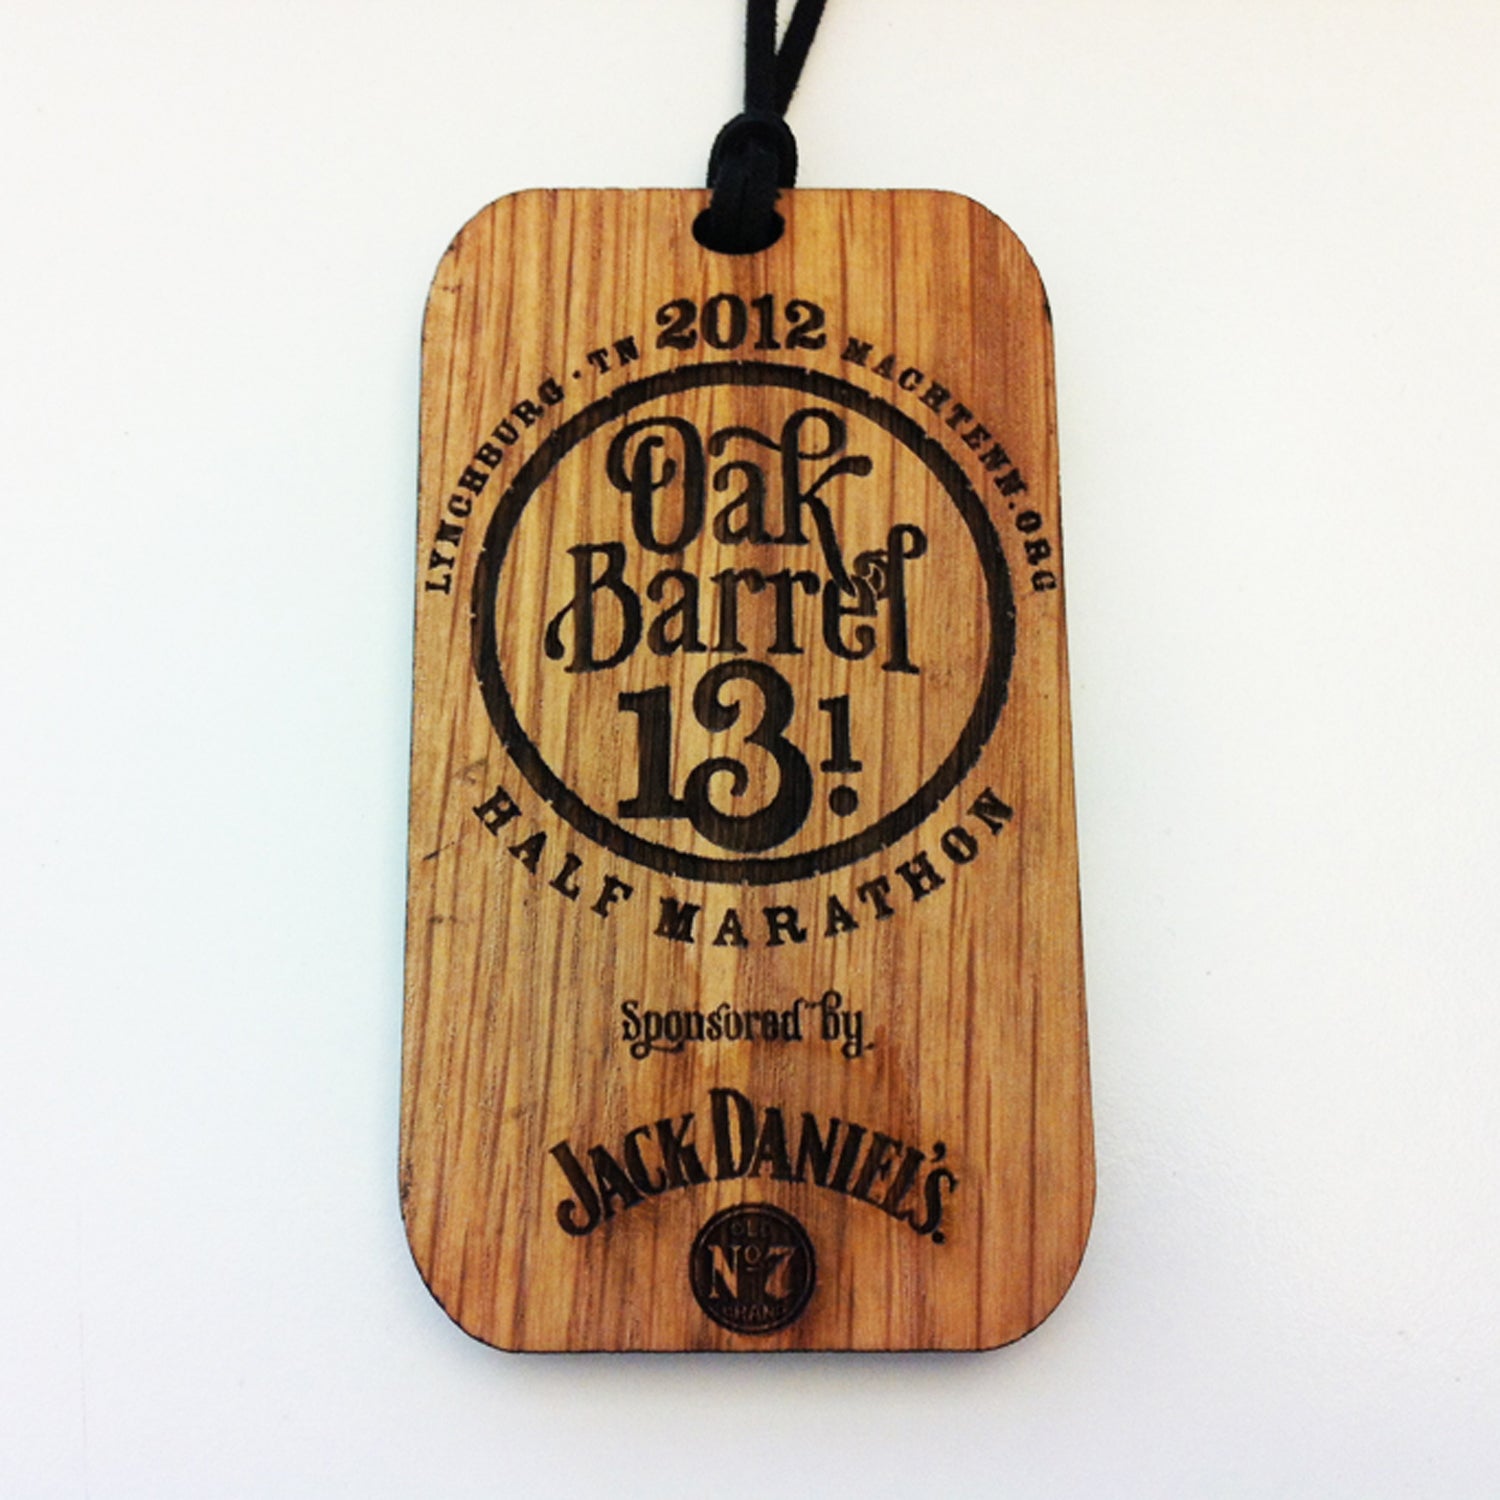 Solera: With so many medals made of its homonym, it’s refreshing to see one made of wood. Sponsored by Jack Daniels, this event gives each finisher a medal that looks as if it were dipped and aged in whiskey. Burnt edges and a leather strap give this memento a lot of Southern charm and character. In keeping with the theme, age group winners received a wedge of a whiskey barrel.